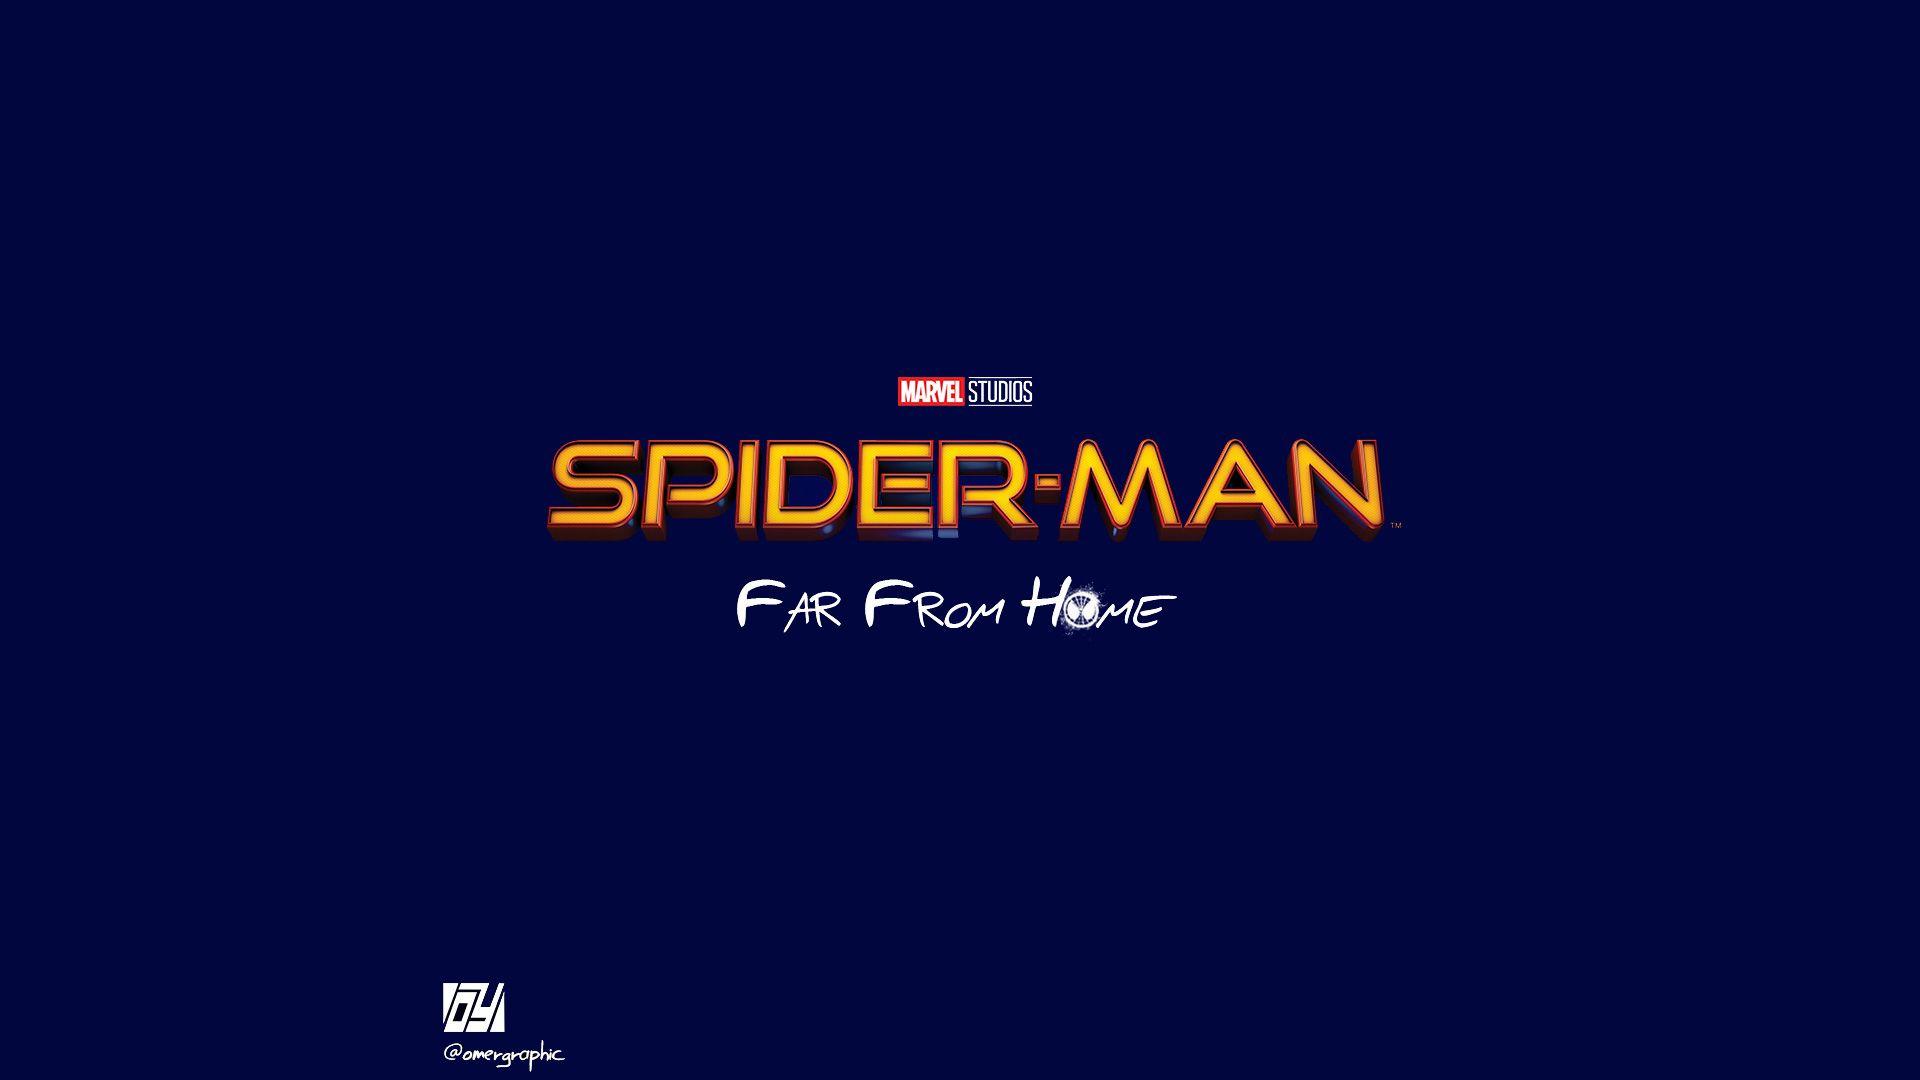 Spiderman Far From Home Movie Logo, 2K Movies, k Wallpapers, Wallpaper